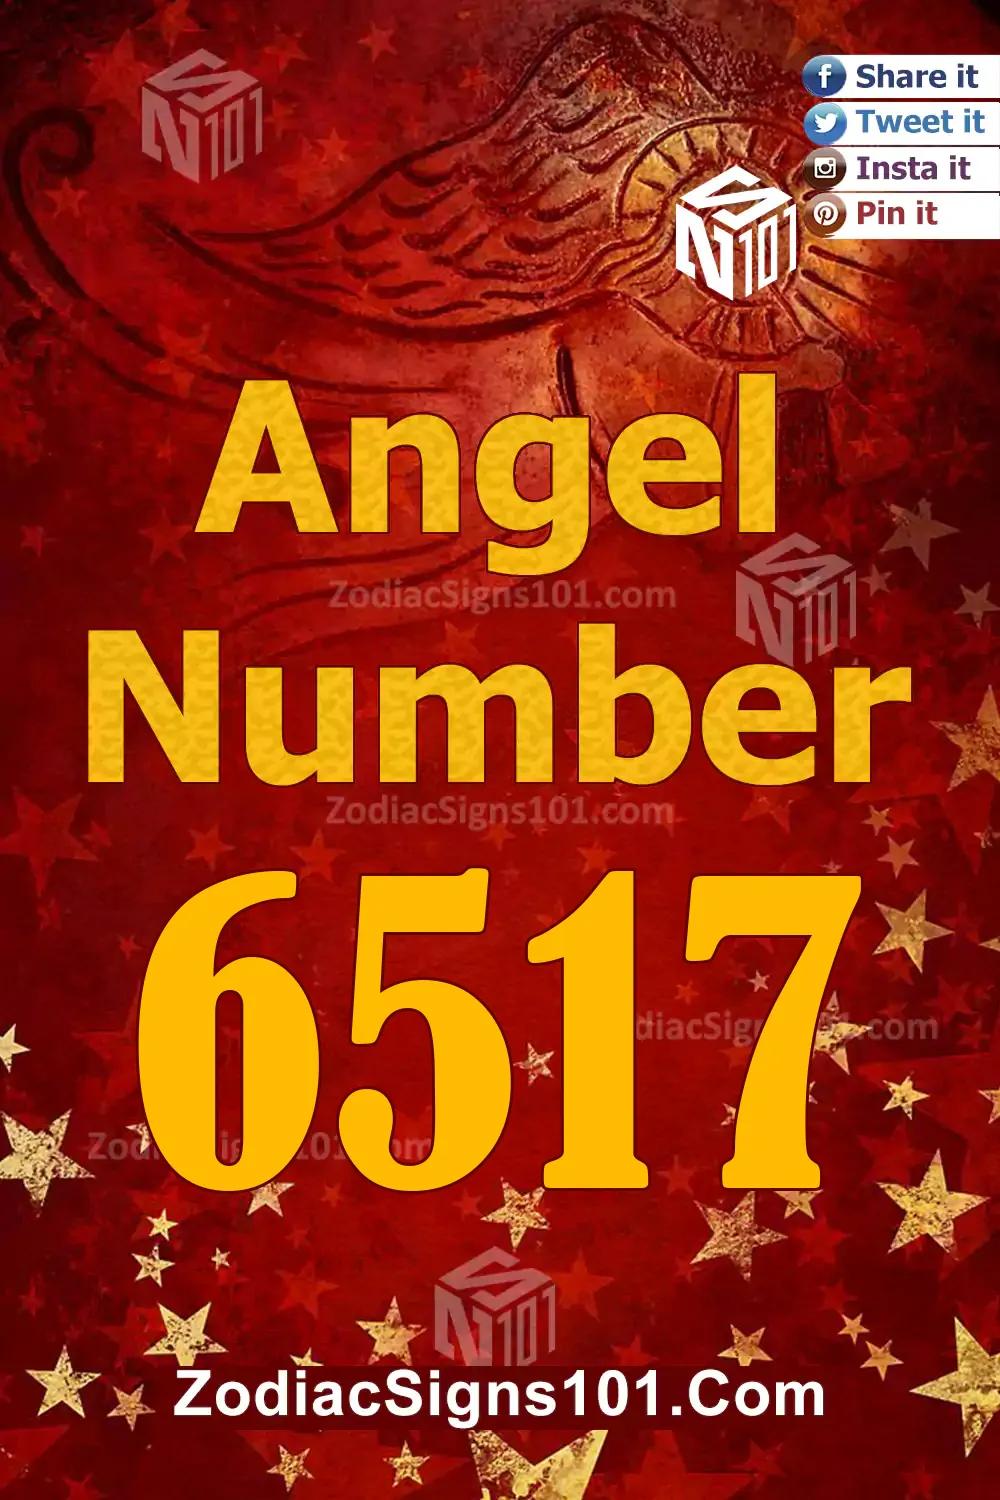 6517 Angel Number Meaning